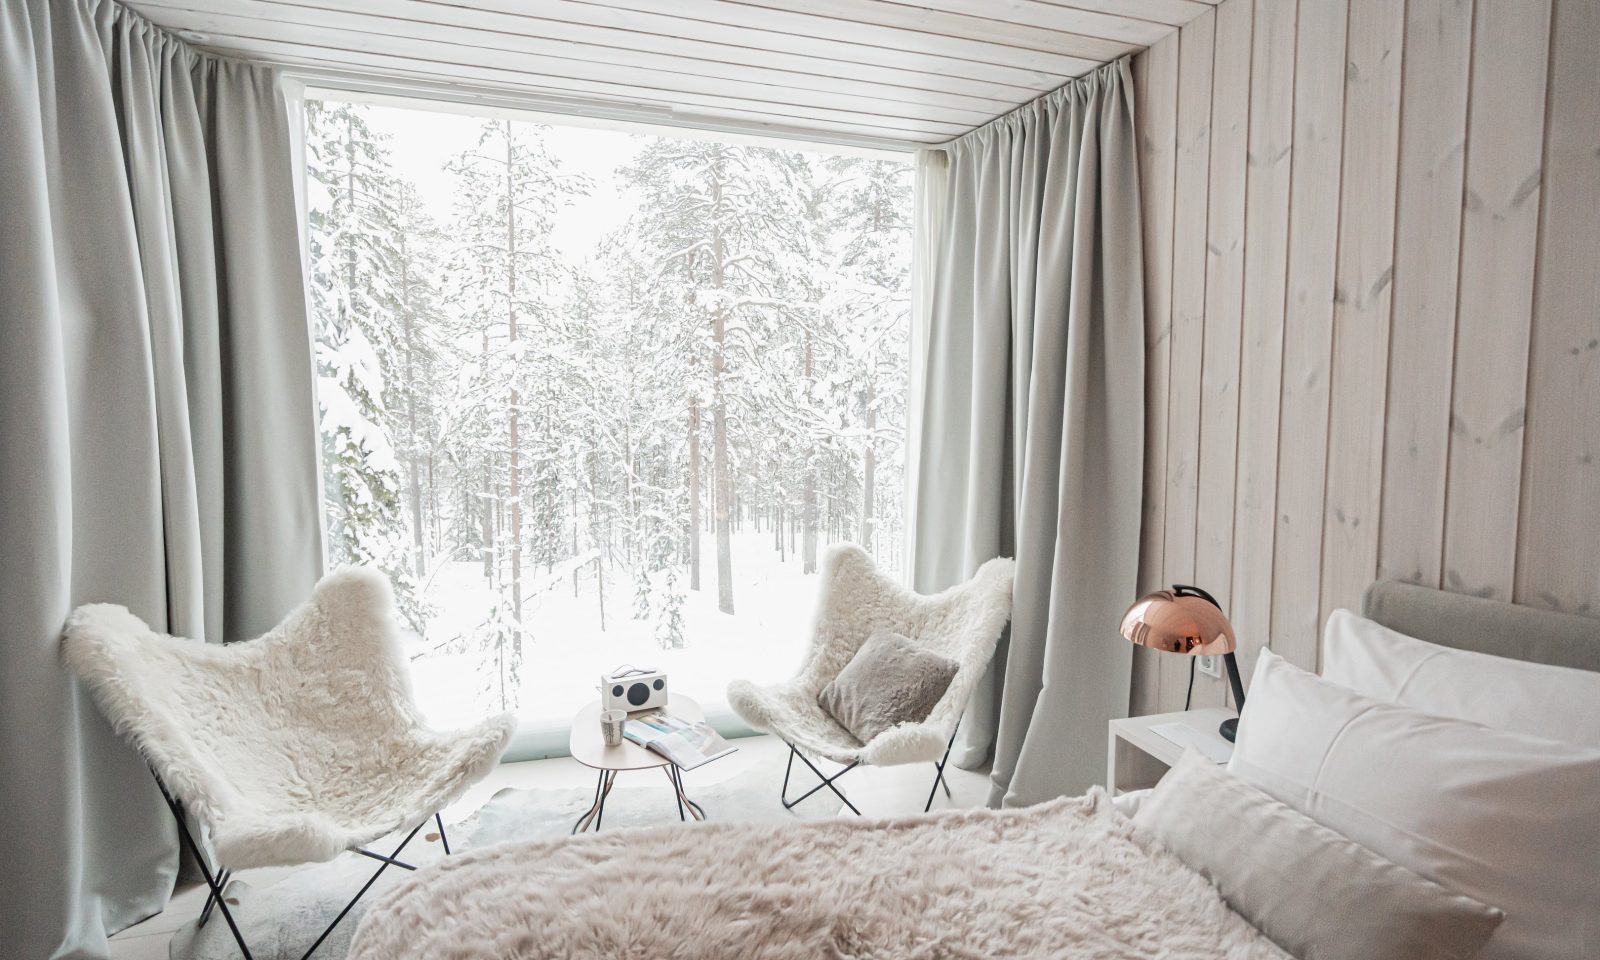 Arctic TreeHouse Suite in the winter in Finnish Lapland, Rovaniemi.